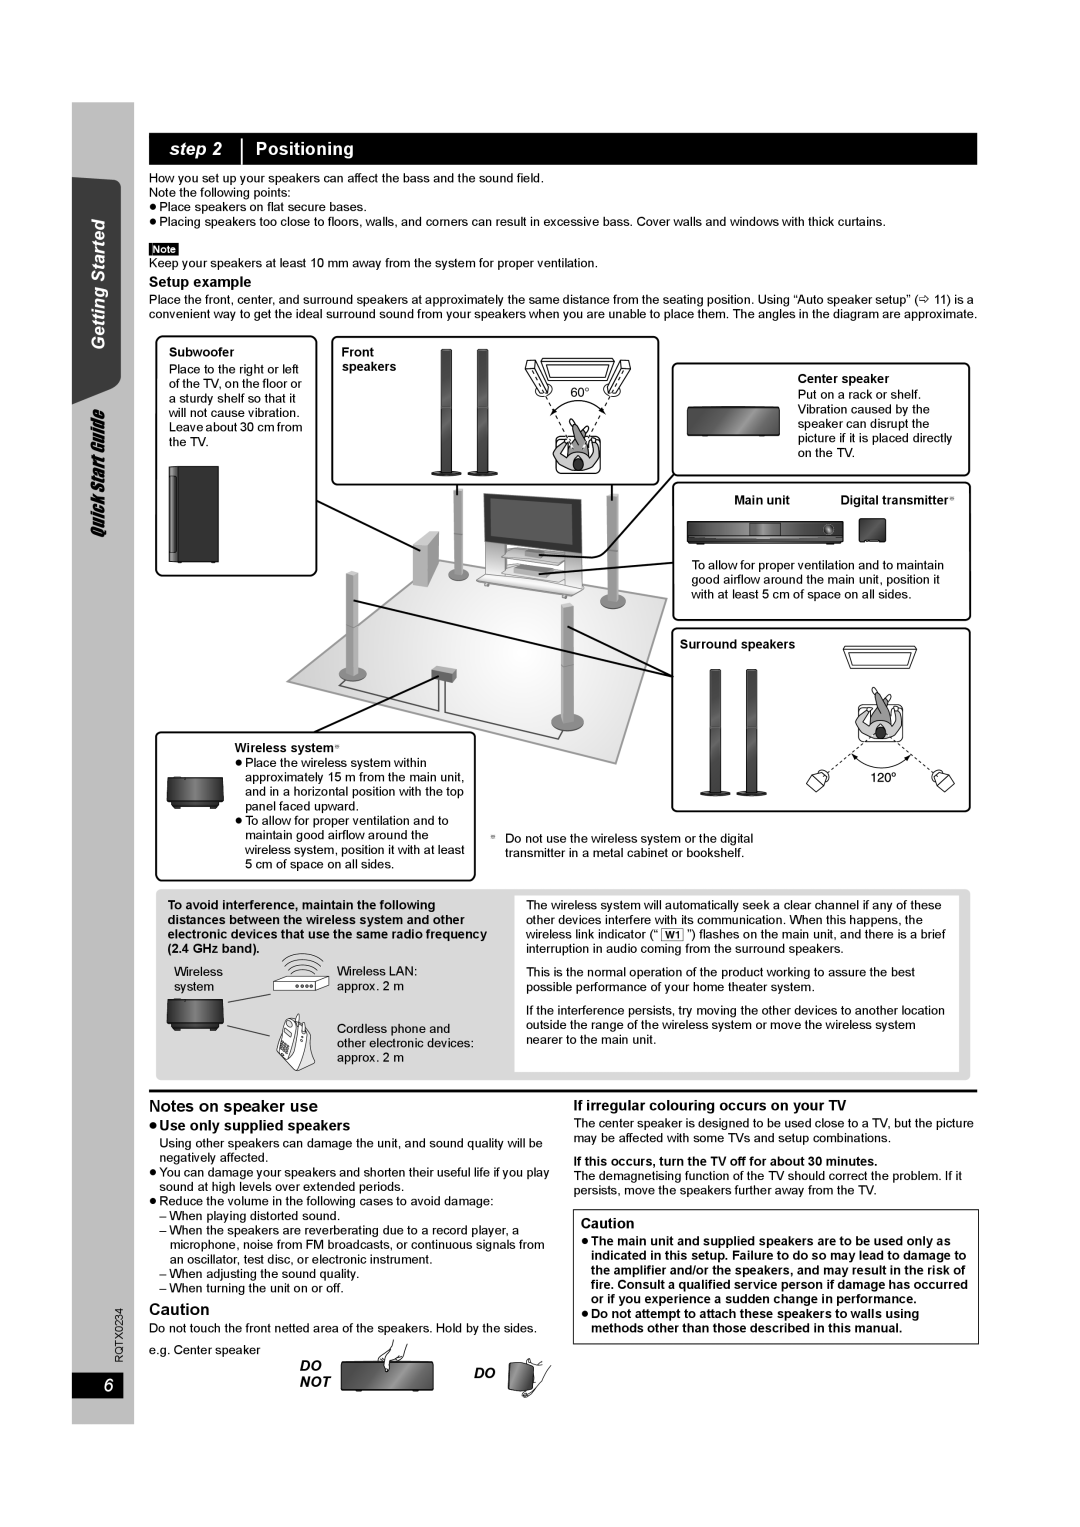 Panasonic SC-PT875 Getting Started, Positioning, Quick Start Guide, Notes on speaker use, Do Do Not, step 